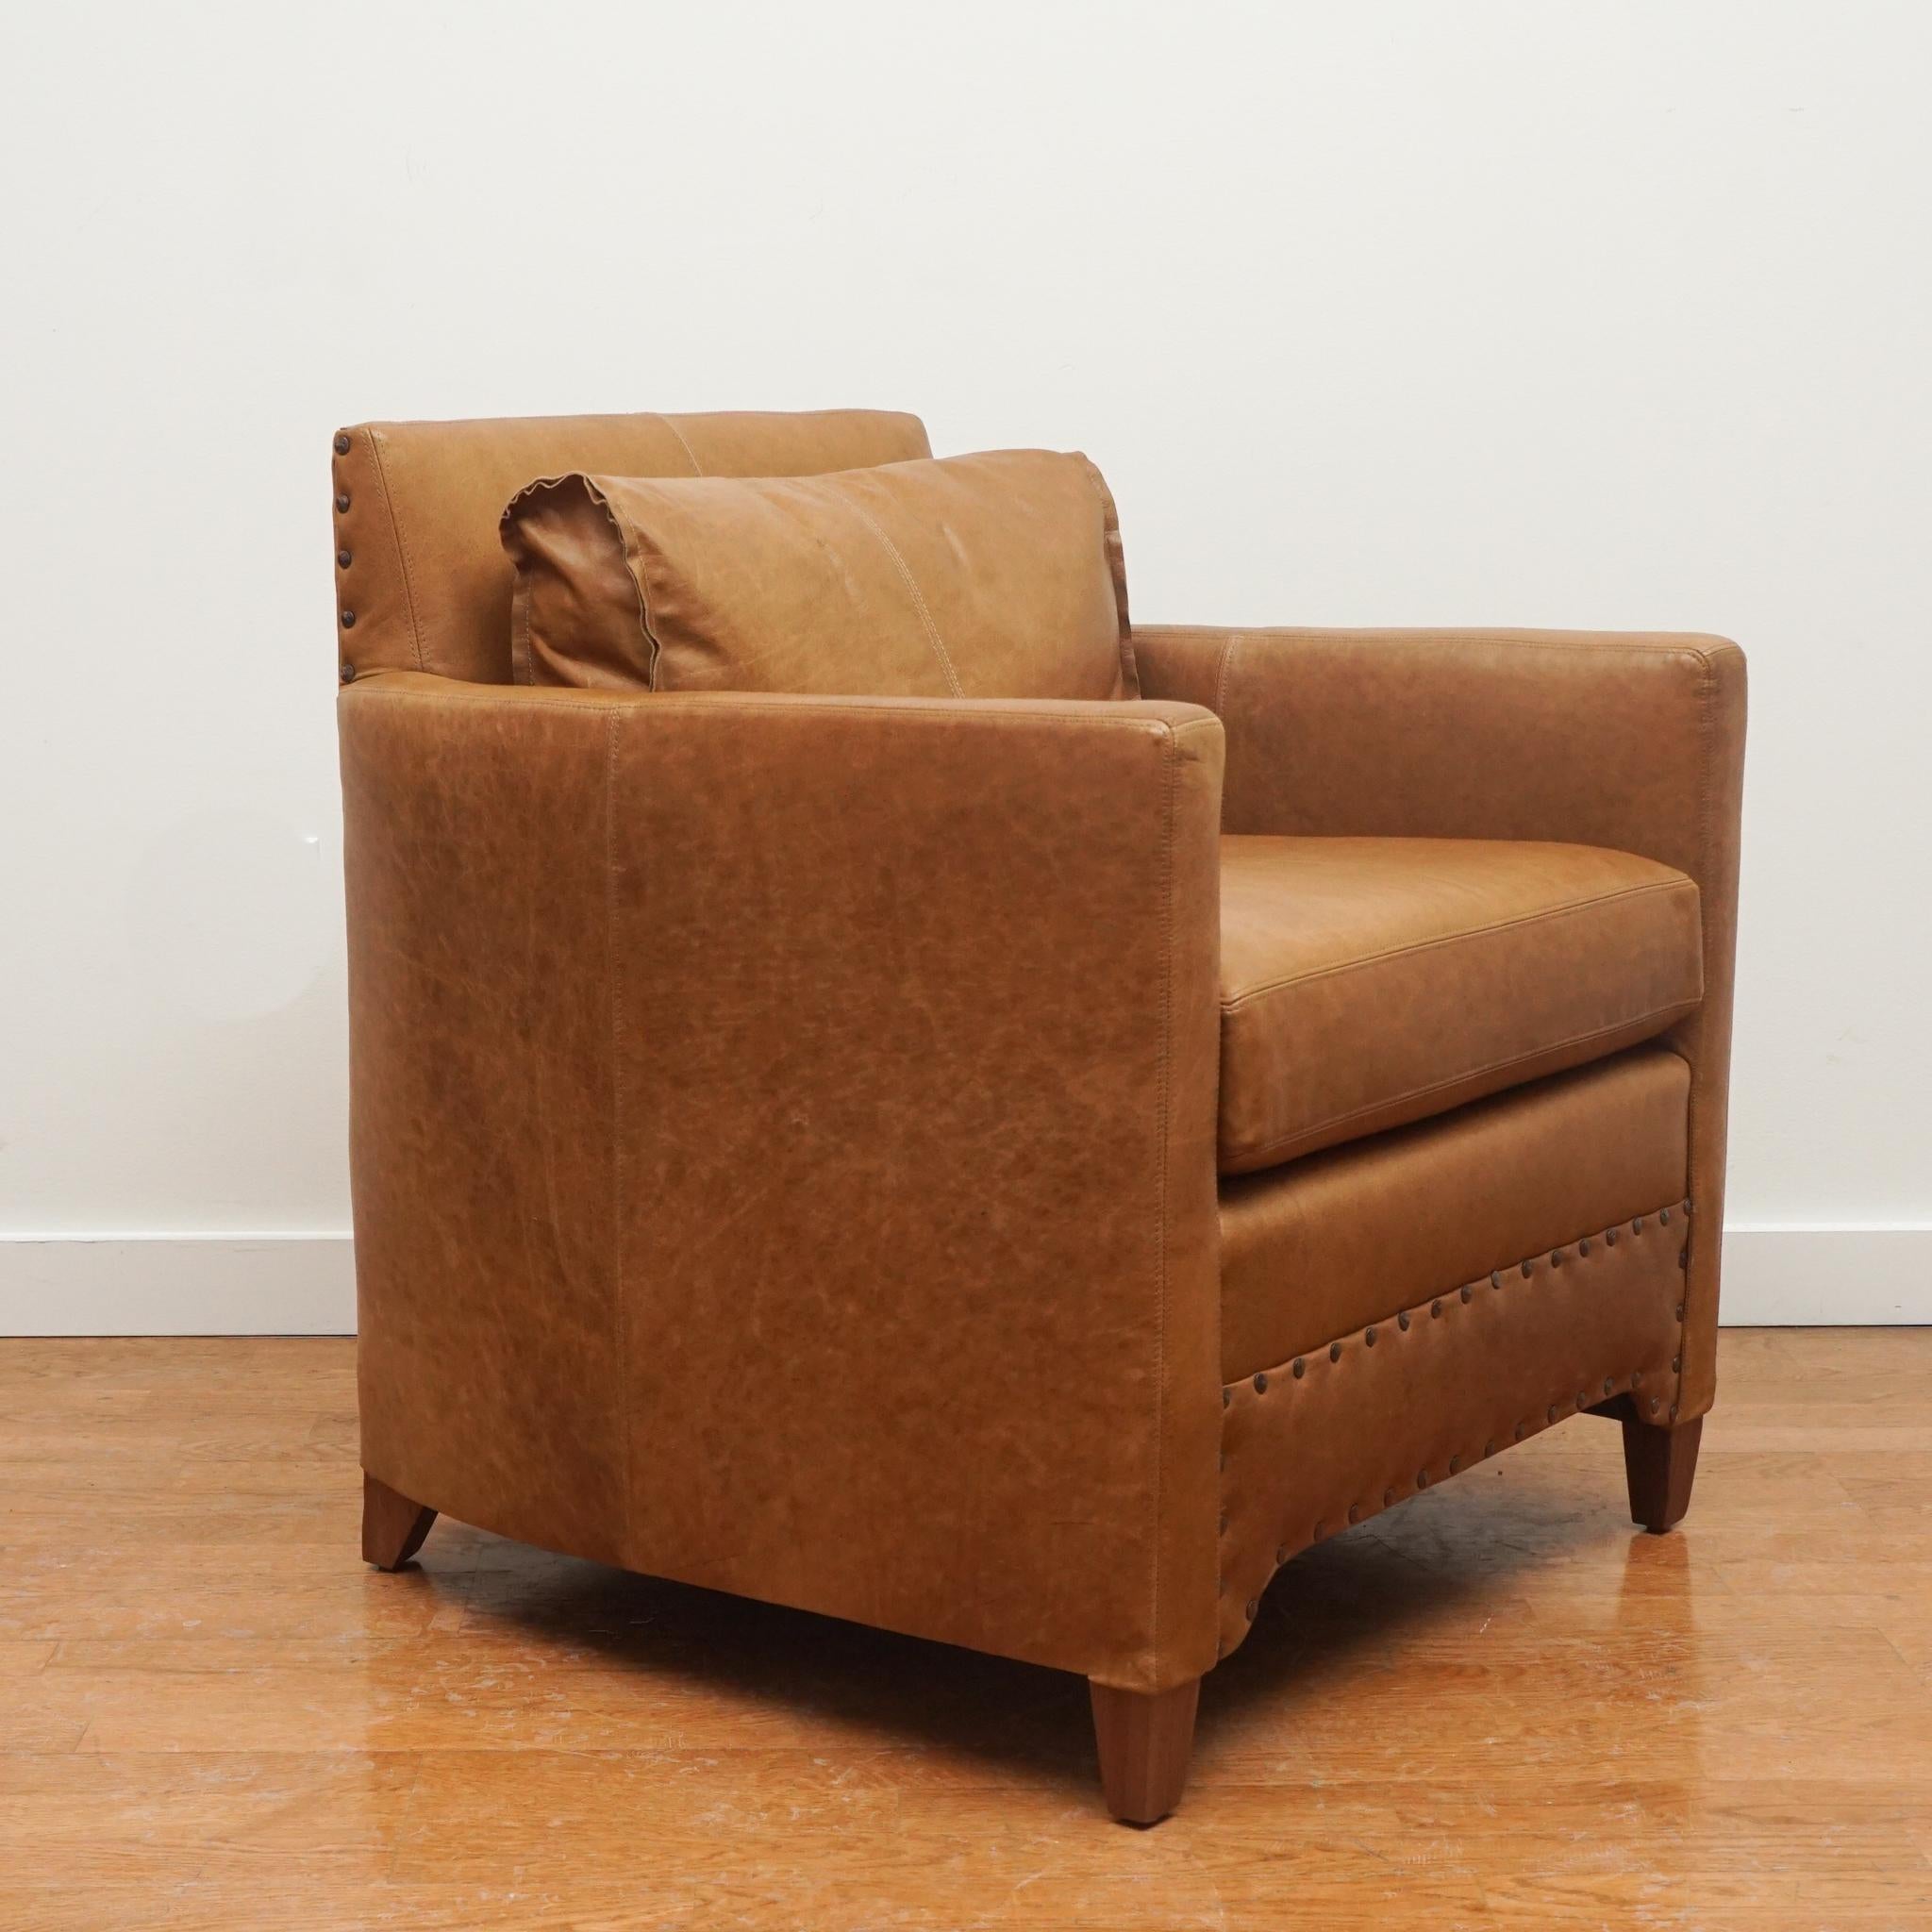 Drawing inspiration from Jean-Michel Frank, this Jean armchair by Verellen is small in scale but big on design and comfort. Shown here in Bozeman Tobacco Brown leather, the chair features spring down seat construction with feather and down back